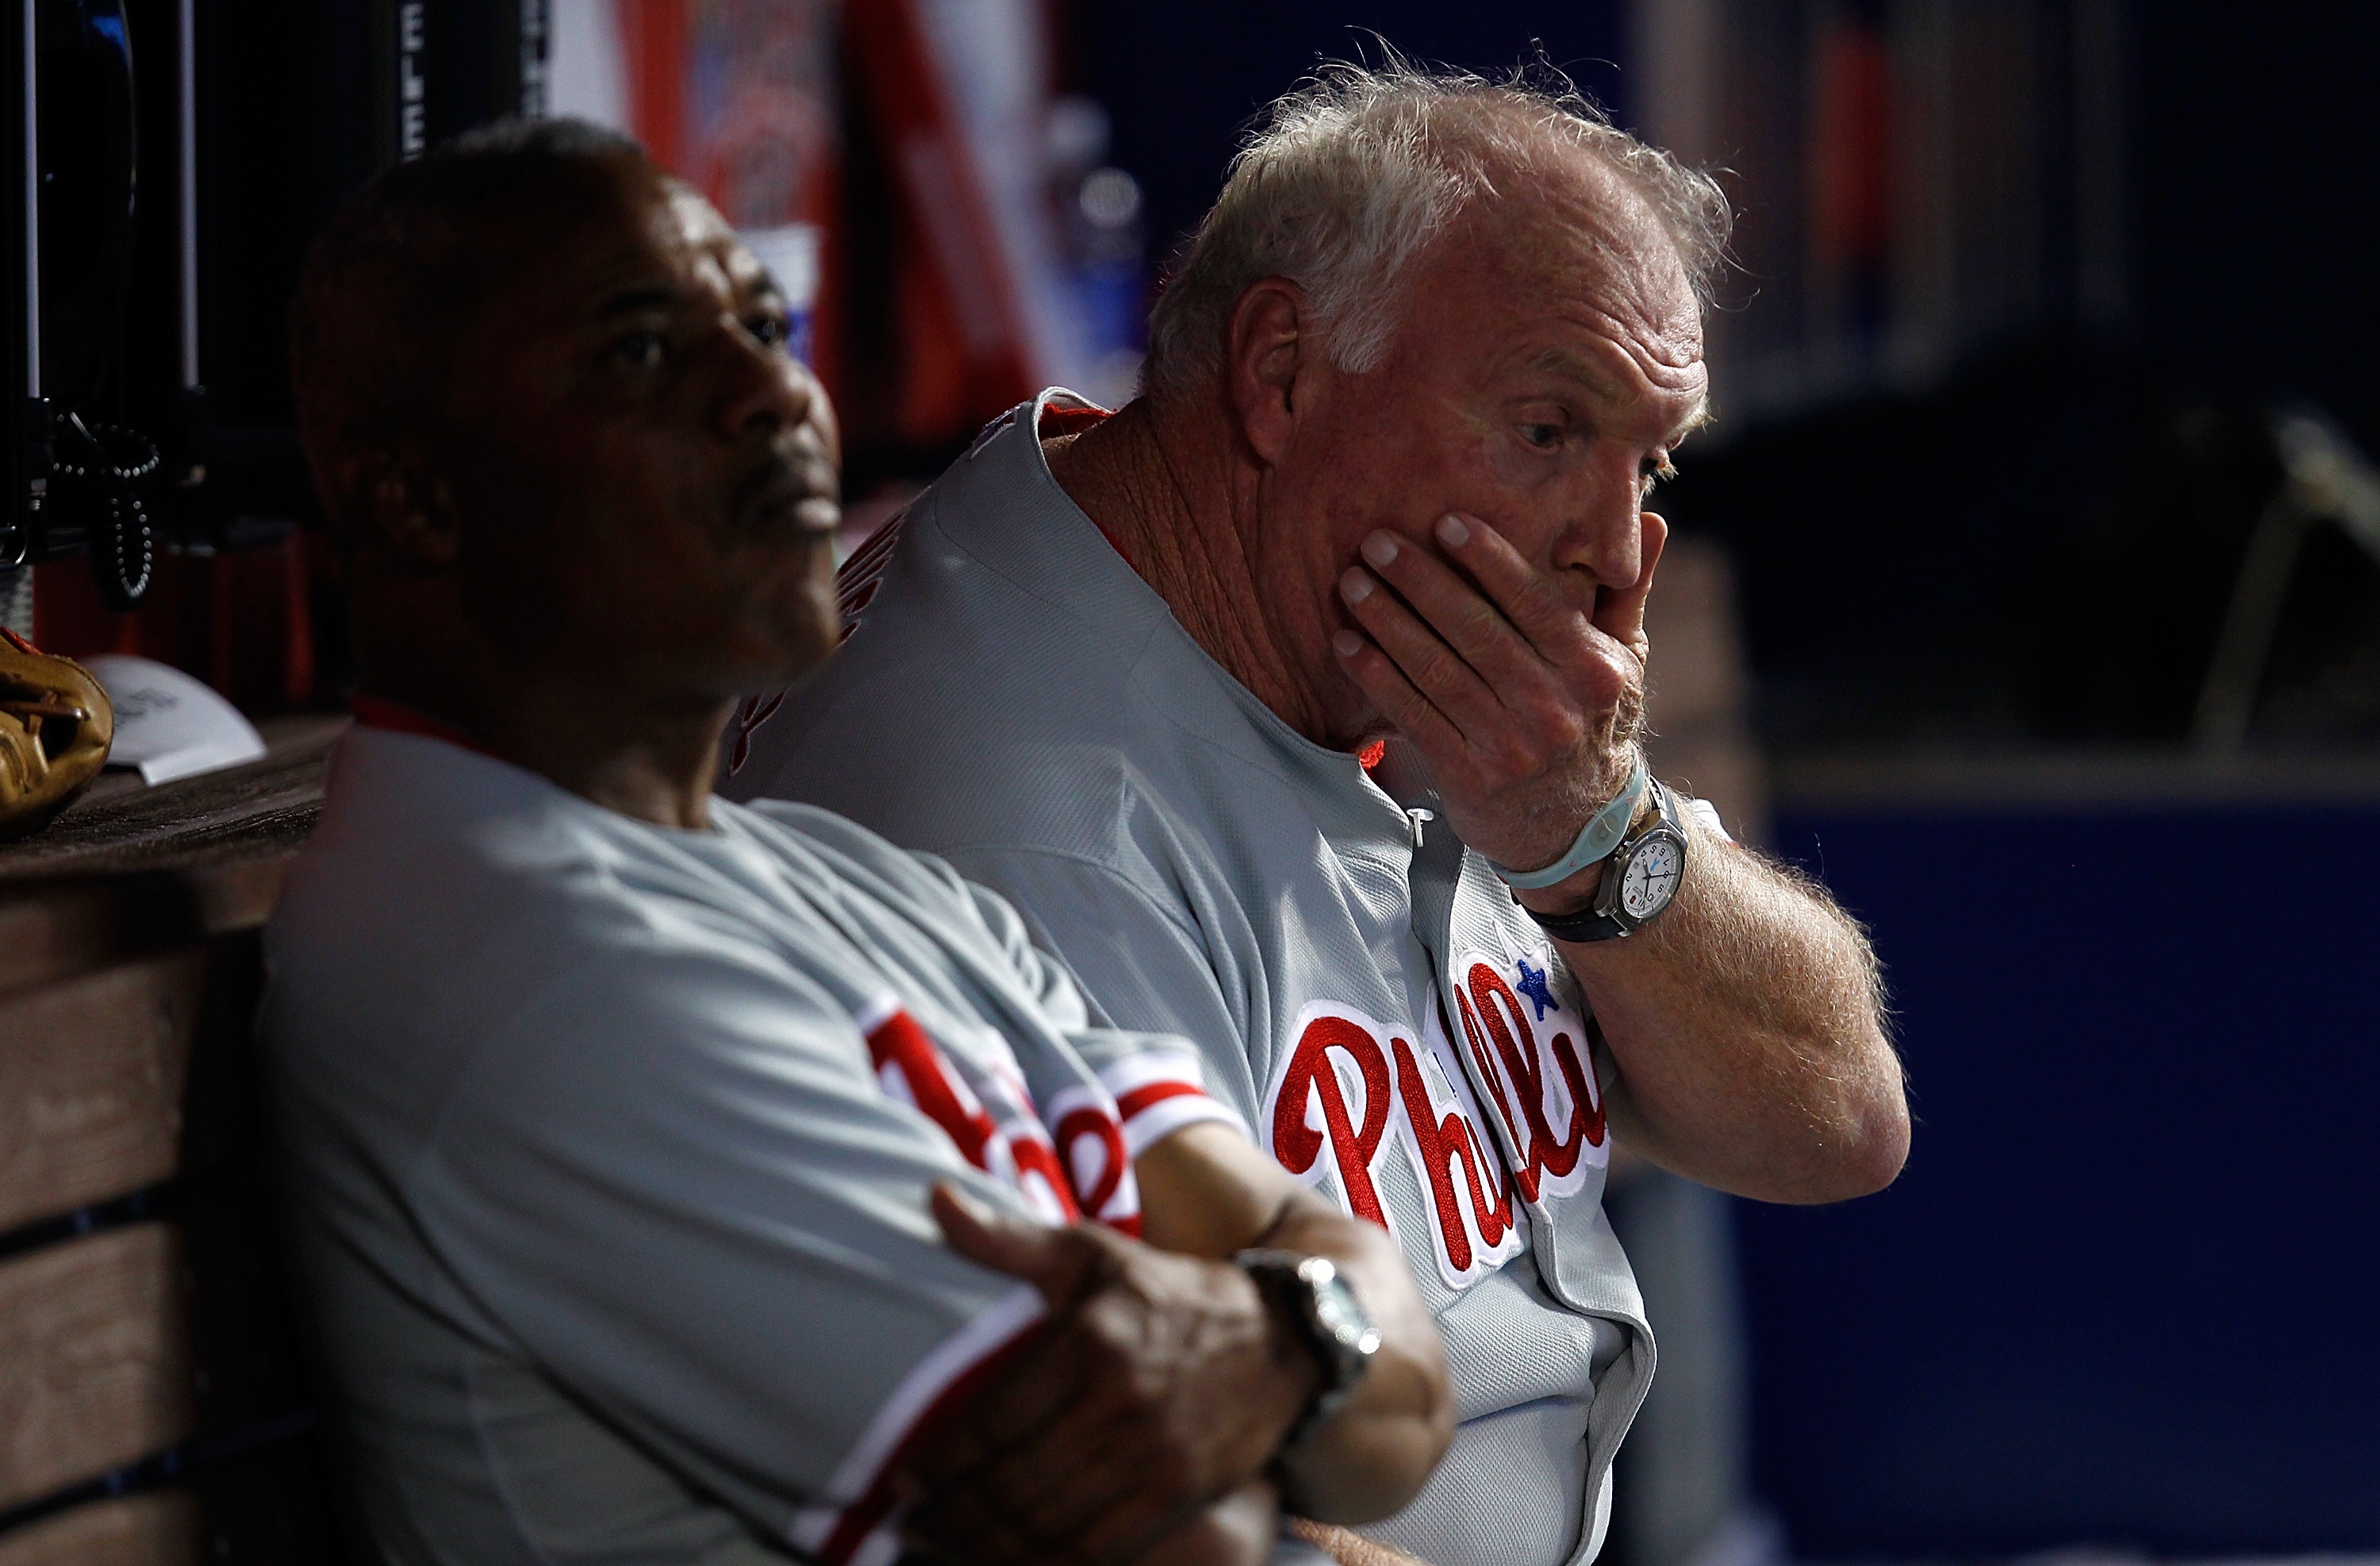 Offense's revival will fall on Phillies hitters, not on Charlie Manuel